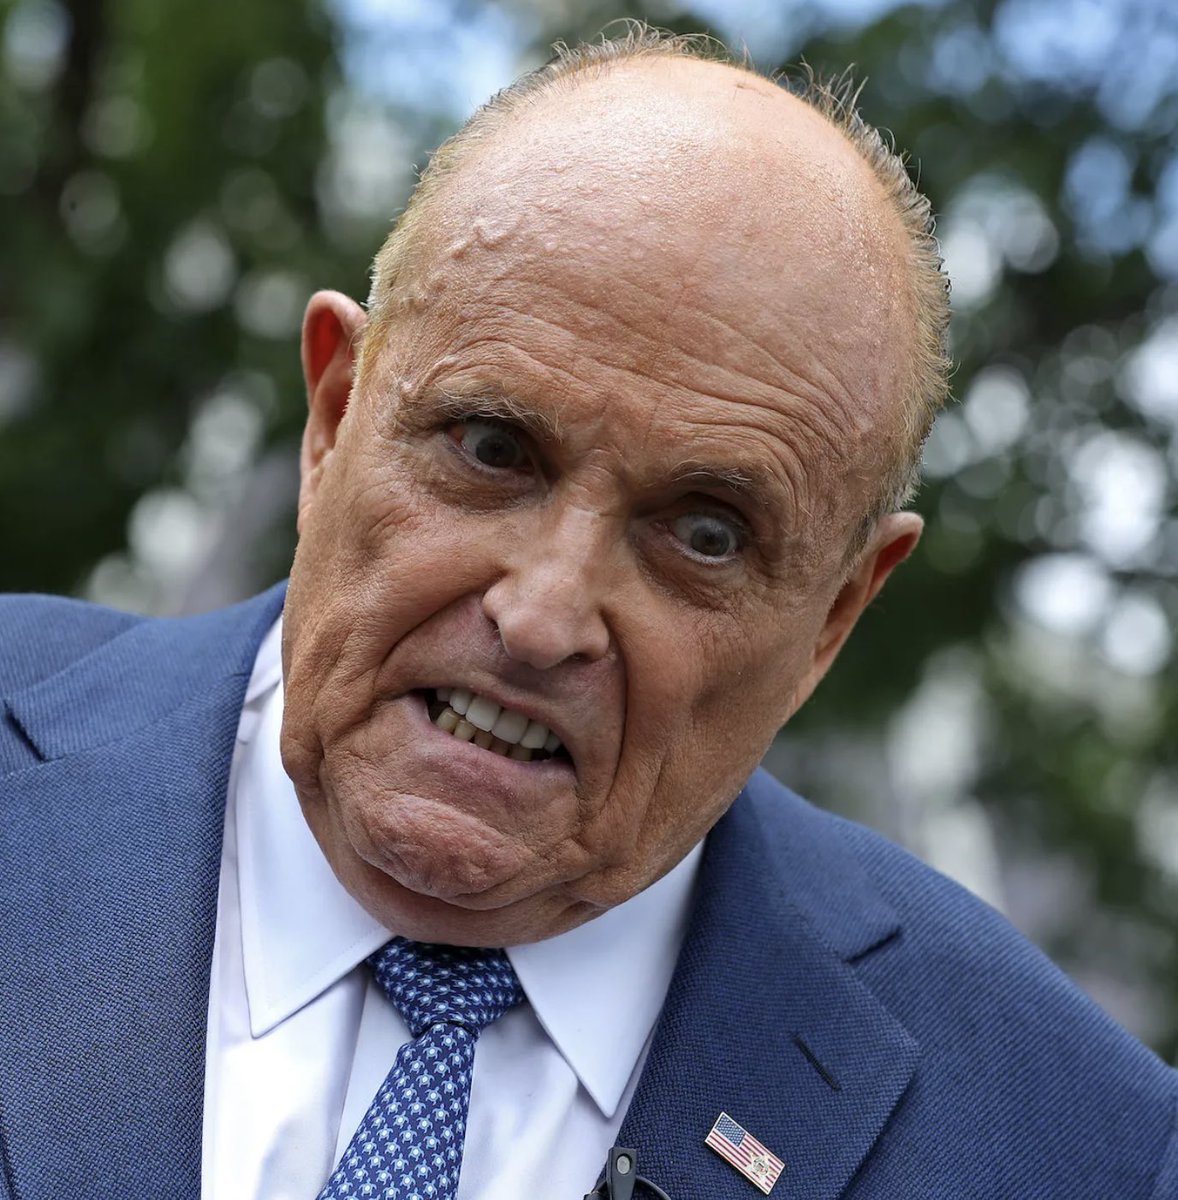 BREAKING: An eavesdropping guest at Mar-a-Lago overhears MAGA thug Rudy Giuliani whining that he 'he wakes up everyday and can’t believe it’s real' now that his life has been destroyed be bankruptcy and court cases. But it gets even better... According to The New York Post, the…